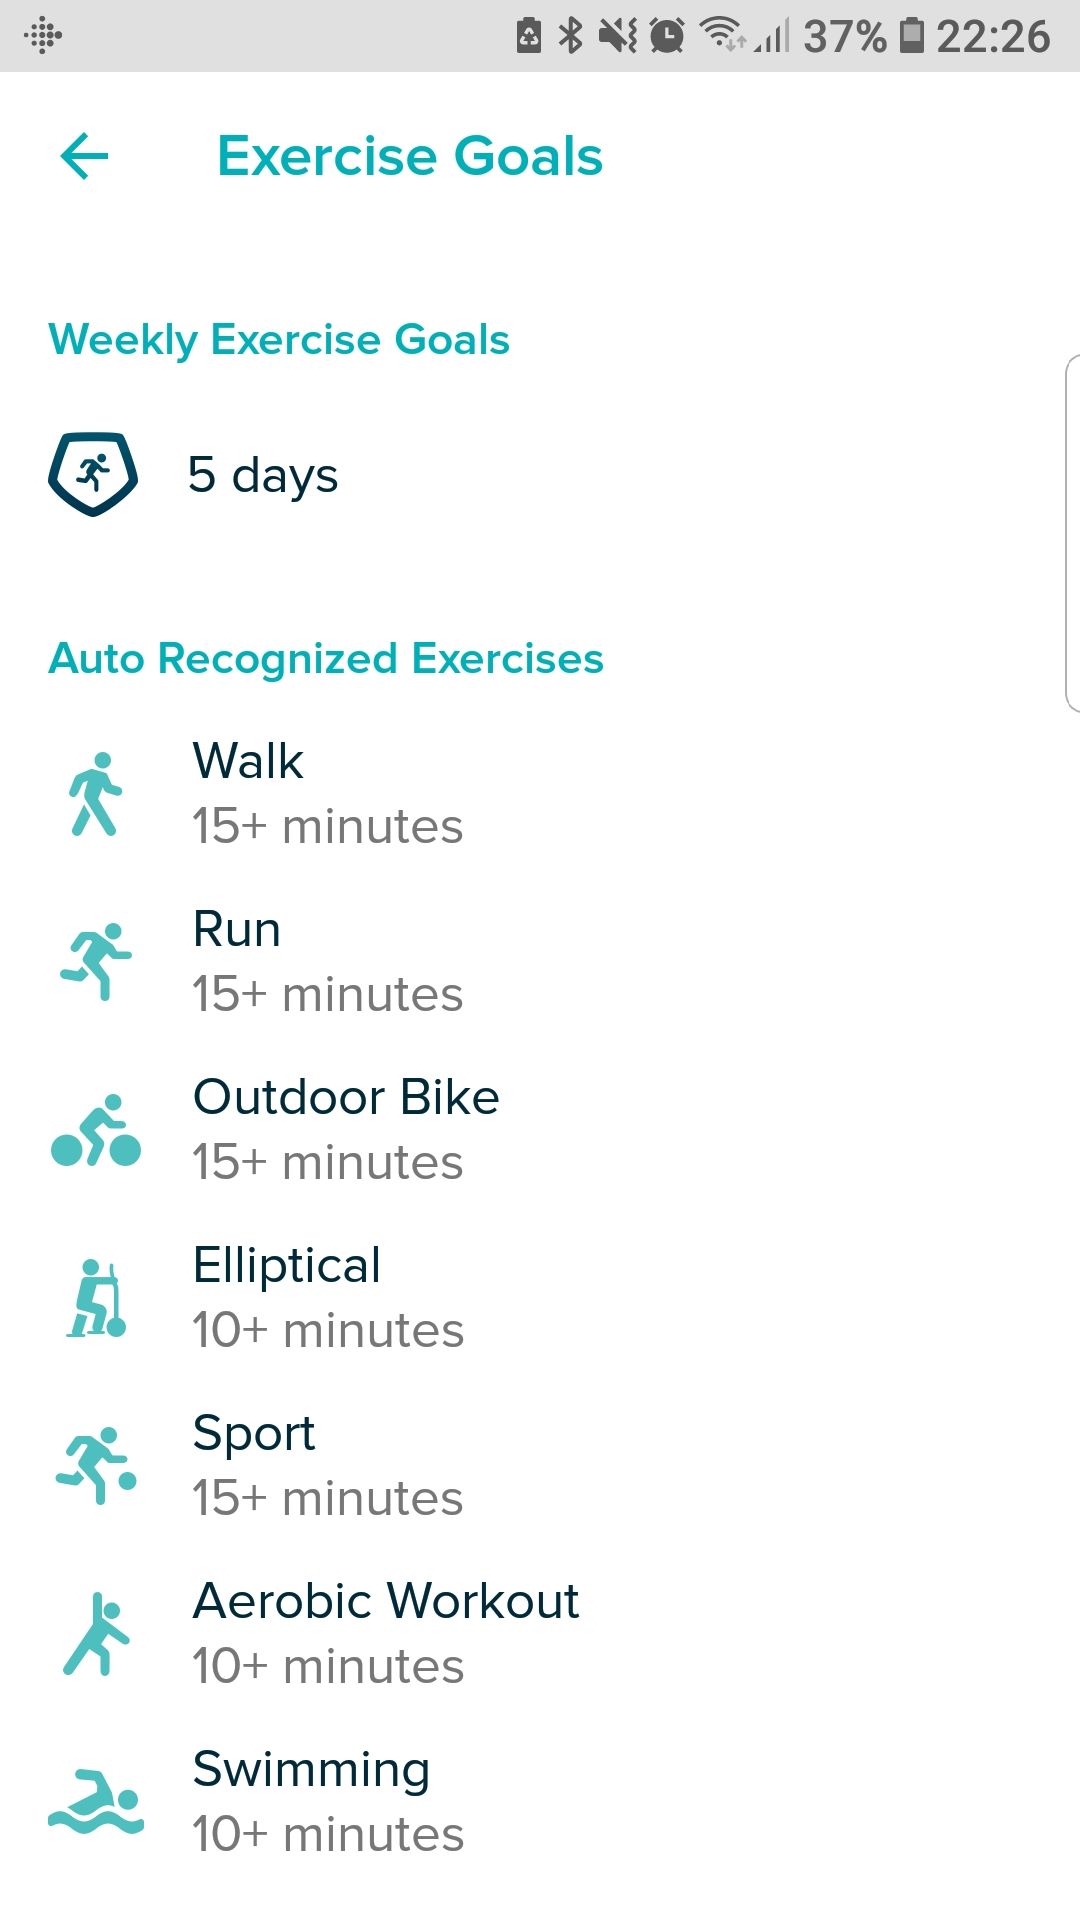 charge 3 exercise modes